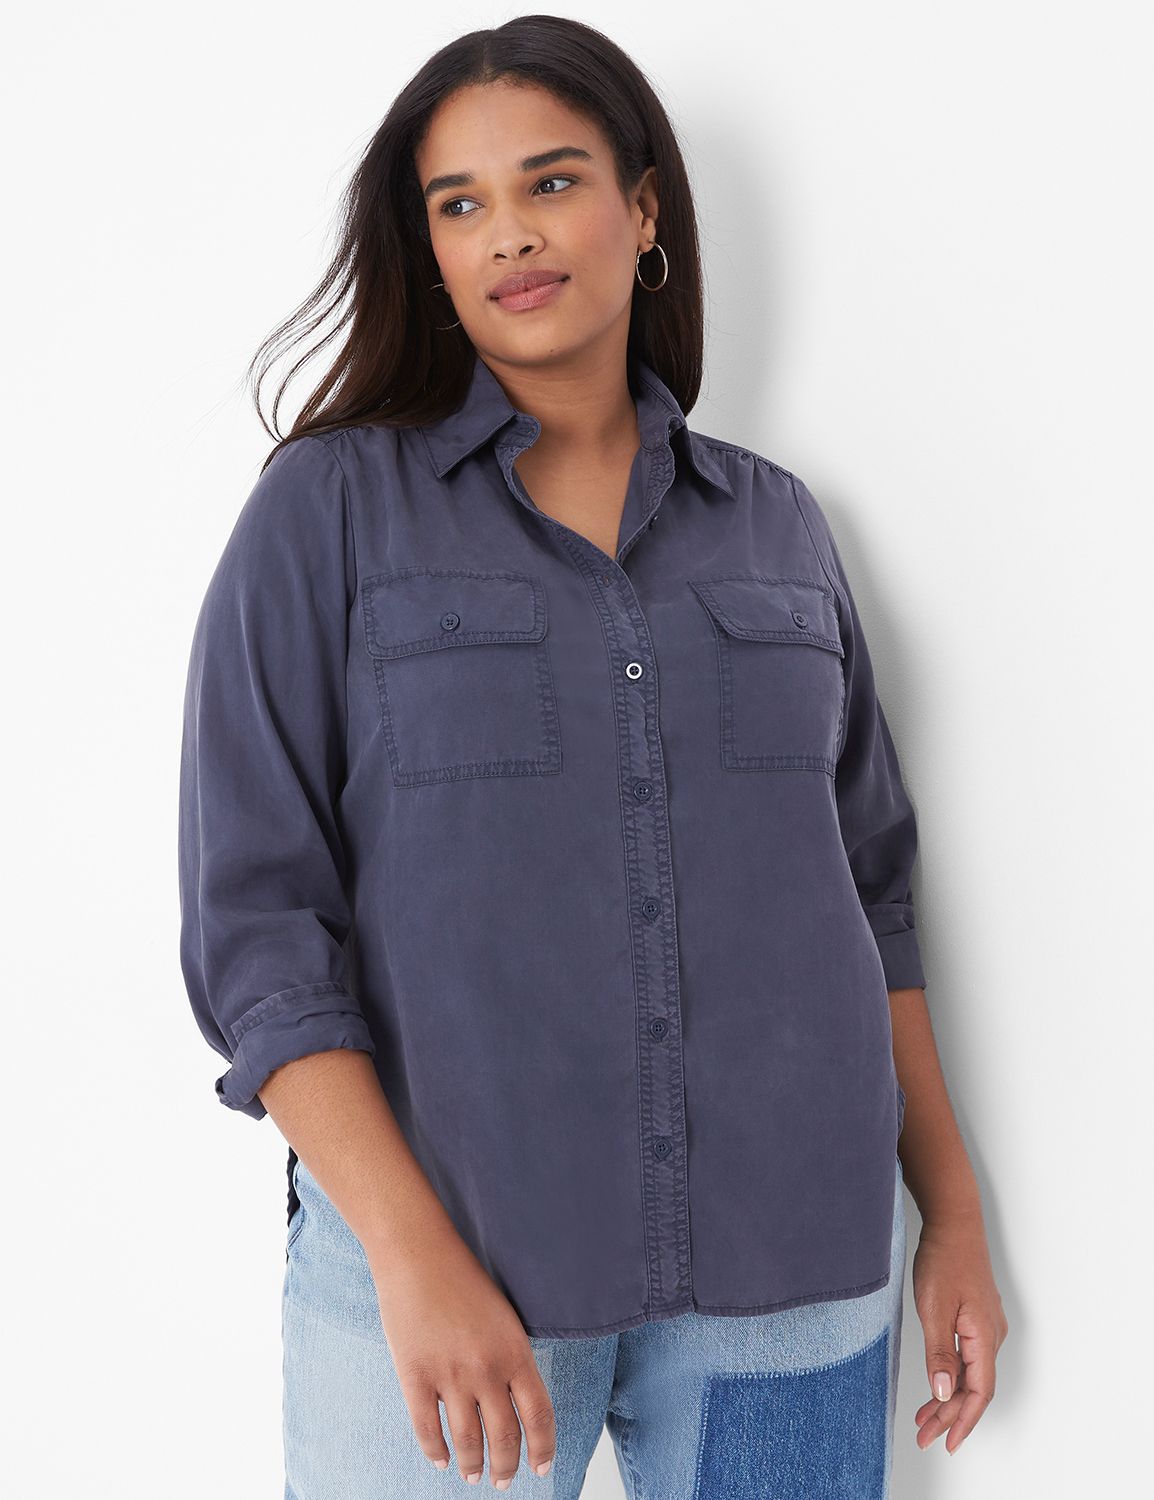 Classic Long Sleeve Collared Button | LaneBryant